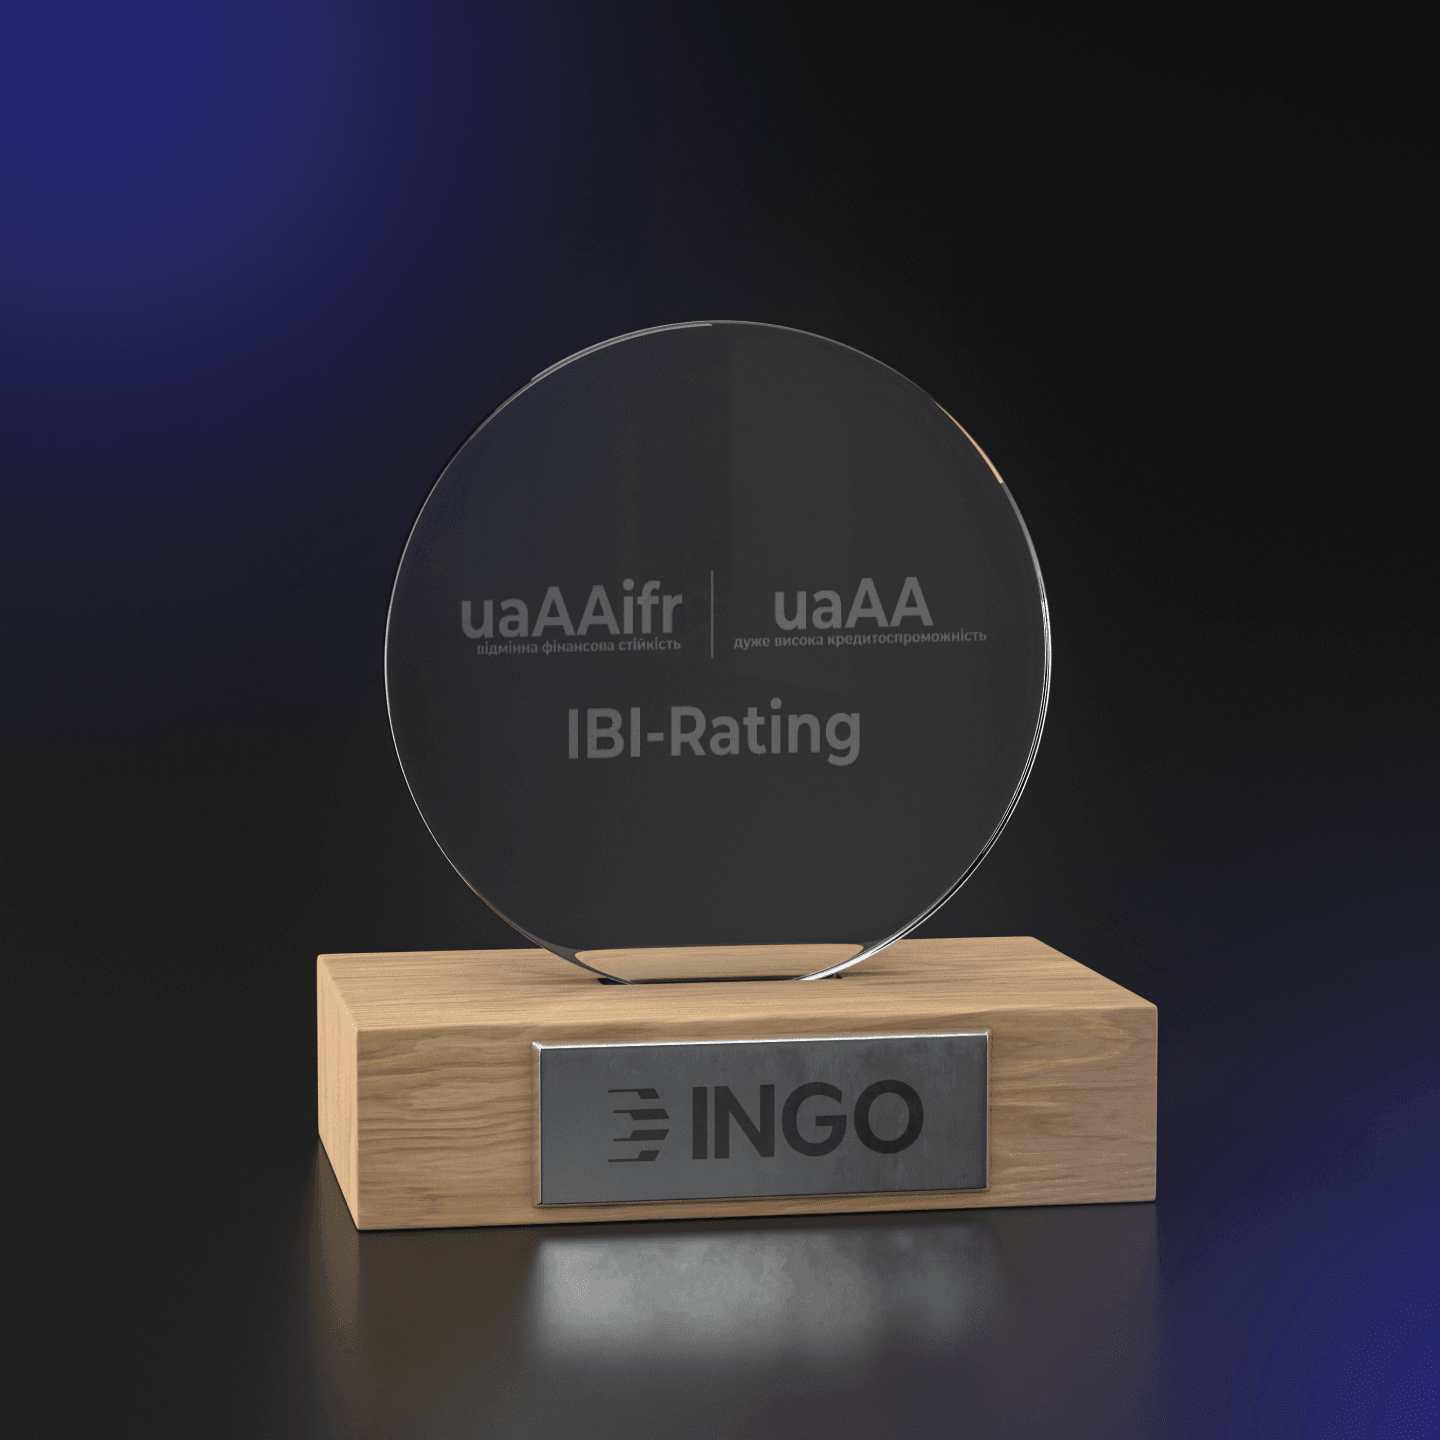 INGO’s Сredit Rating and Financial Strength Rating Remain at a High Level